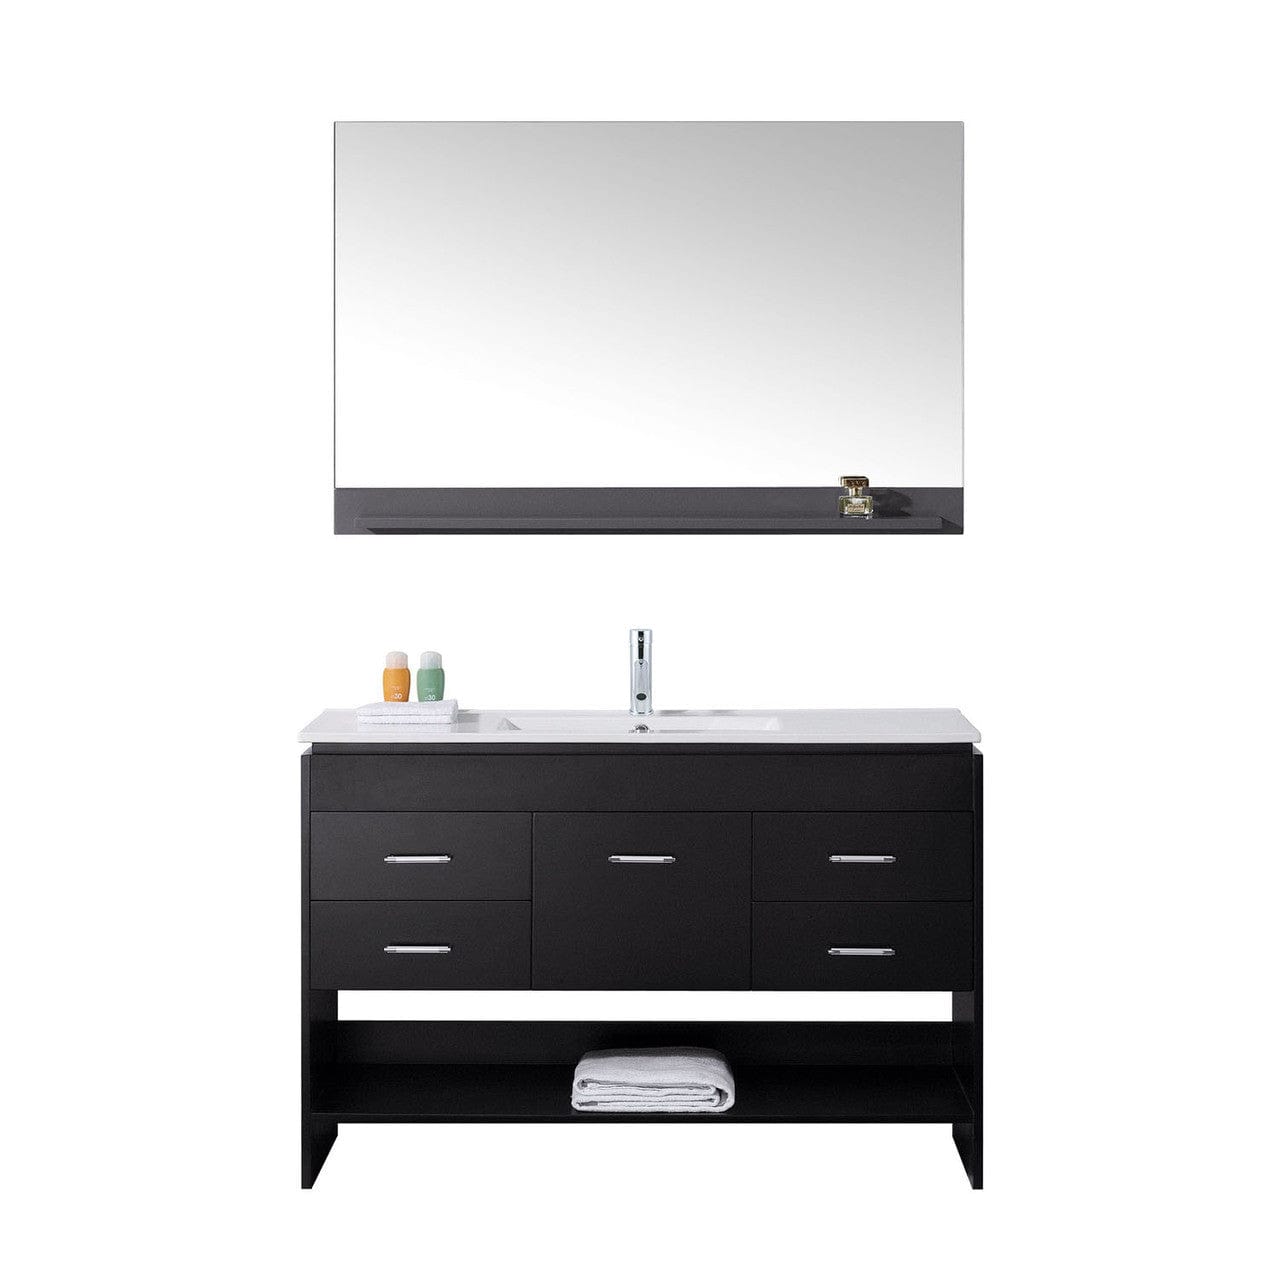 Virtu USA Gloria 48" Single Square Sink Espresso Top Vanity in Espresso with Polished Chrome Faucet and Mirror